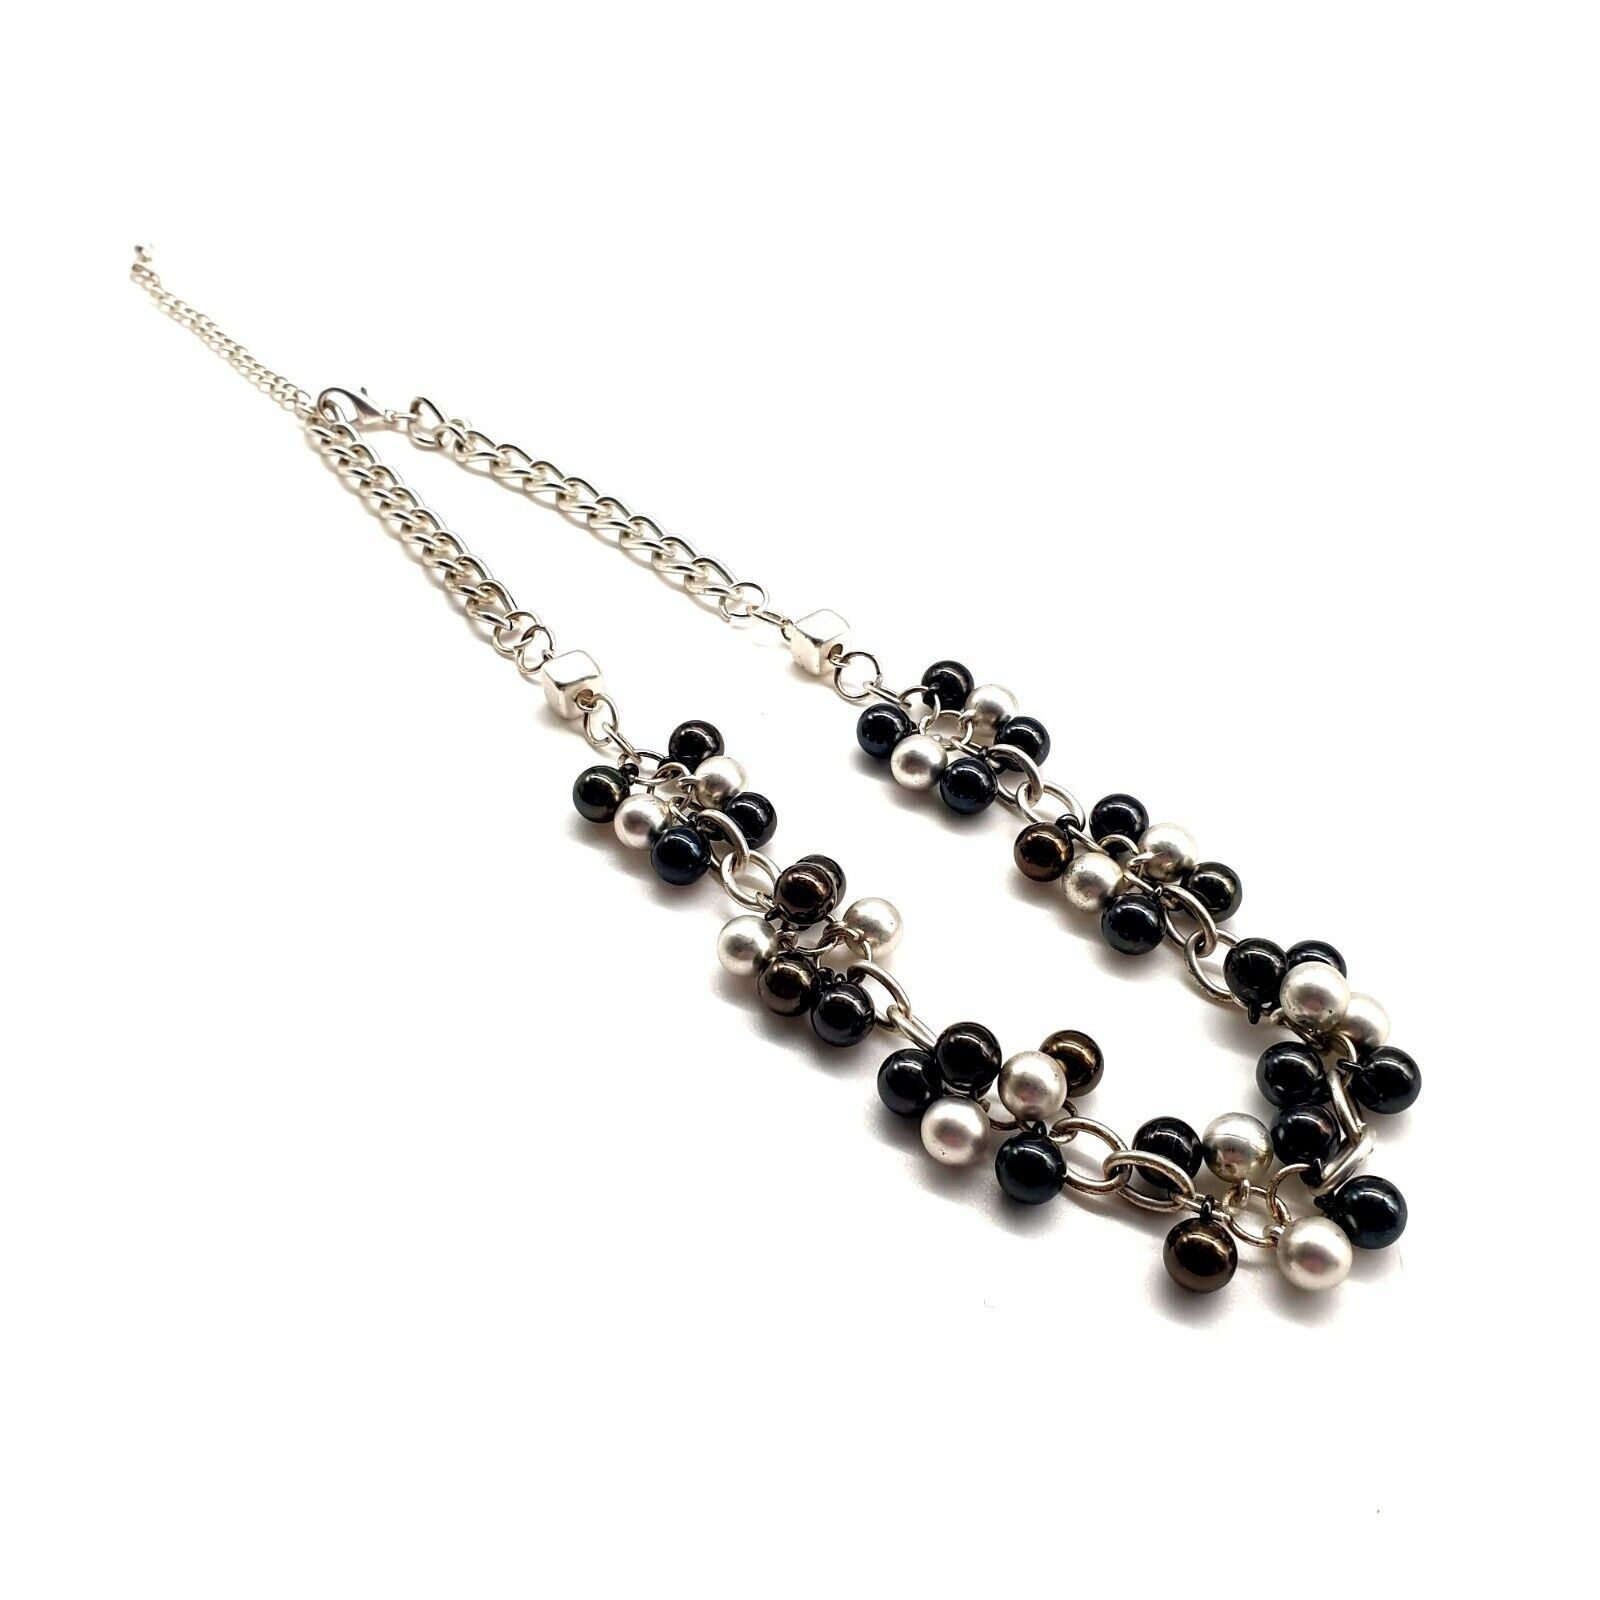 Primary image for Necklace Womens Costume Jewelry Statement Silver Tone Black Beads Charm Adjust